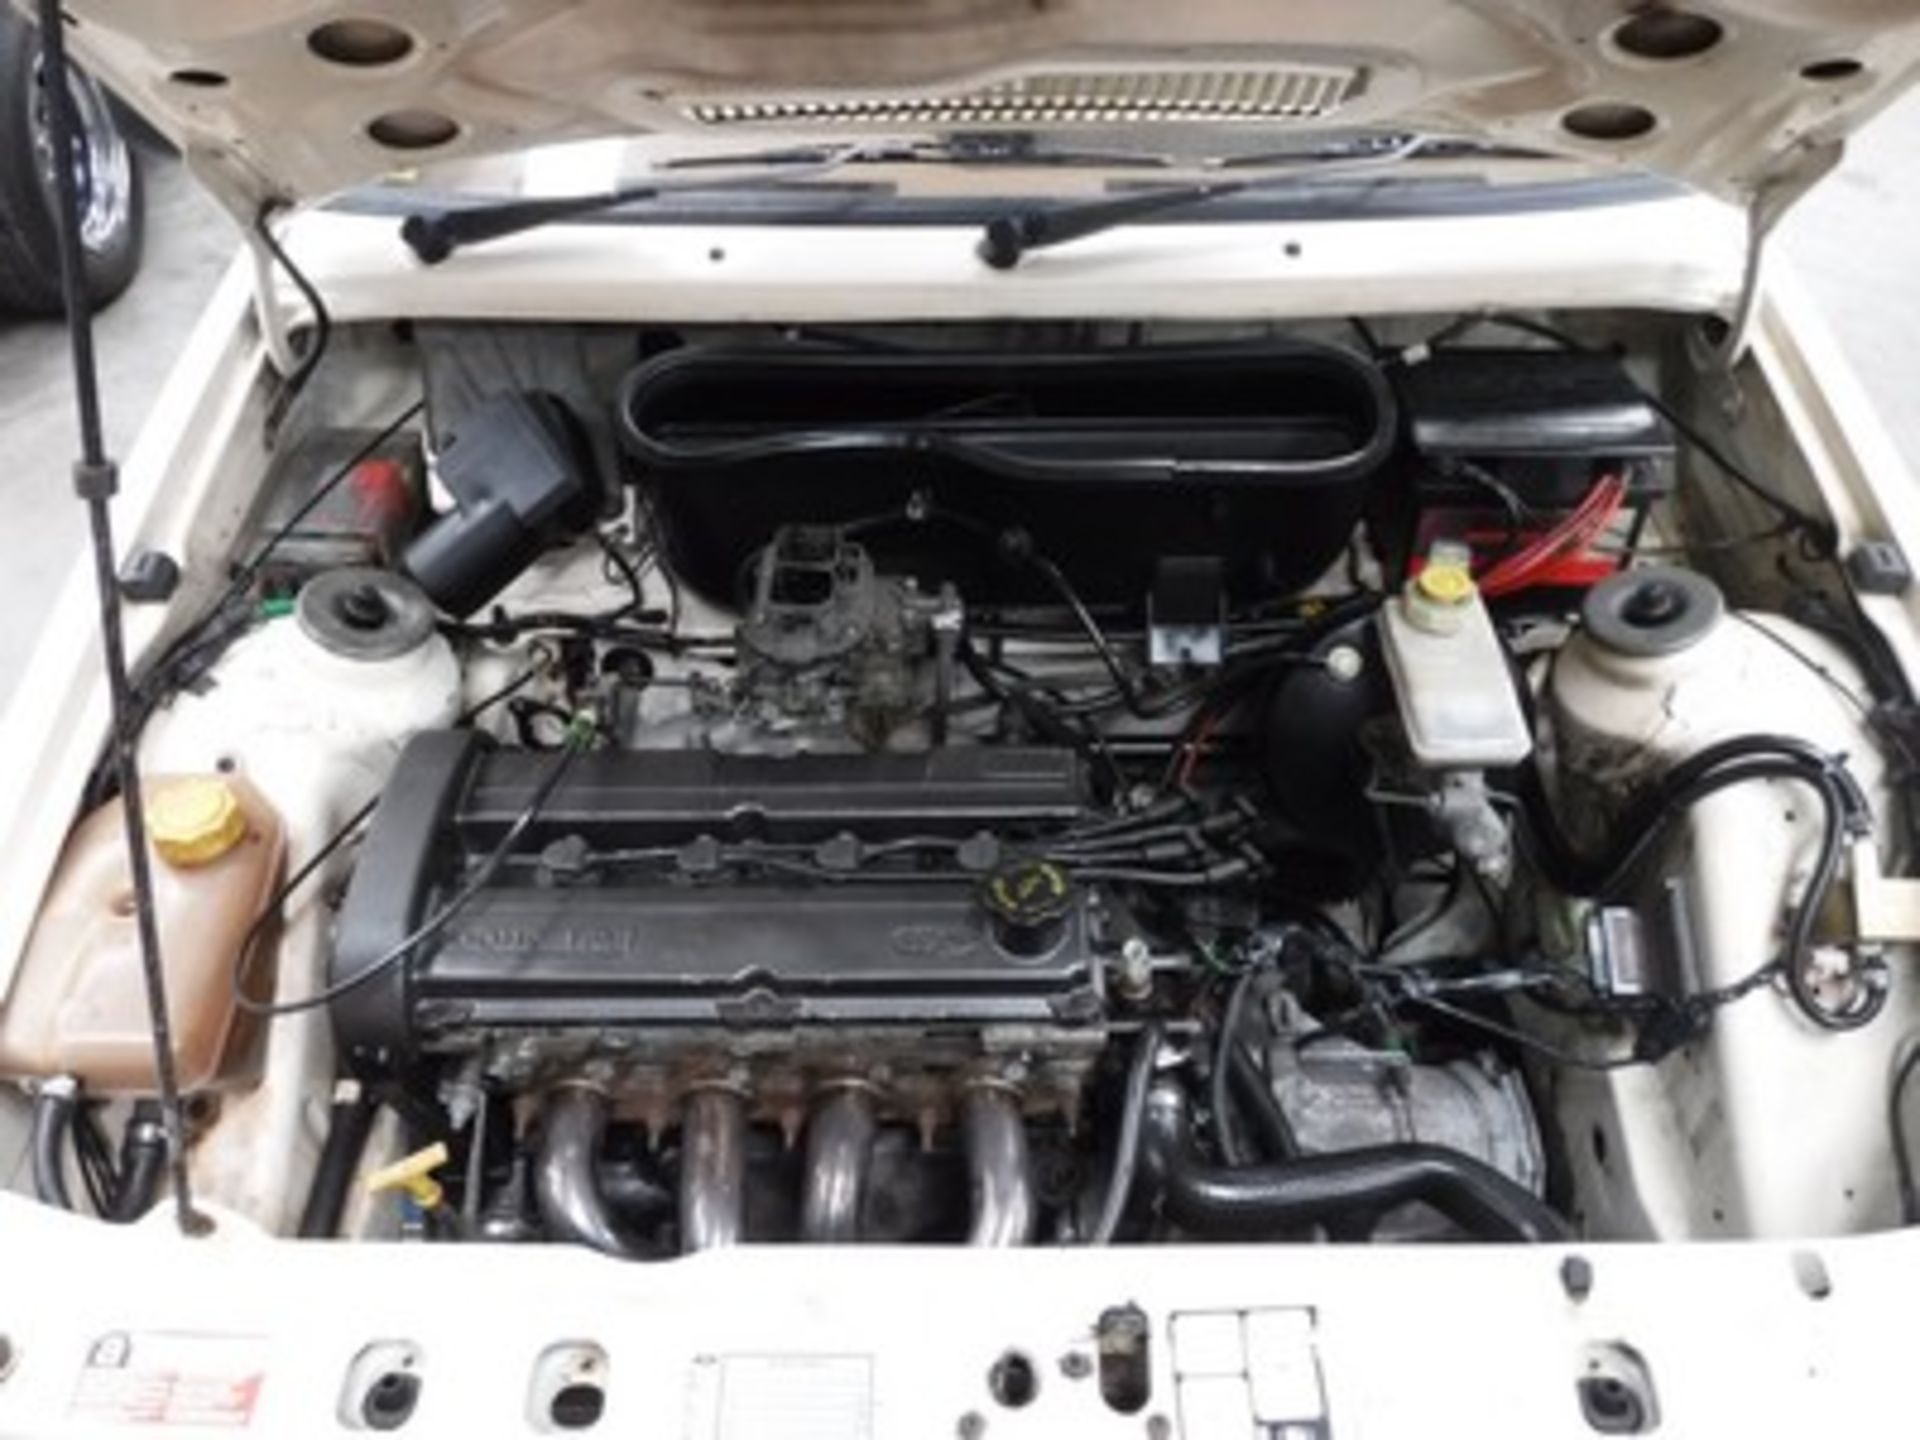 FORD ORION LX - 1596cc - Image 11 of 32